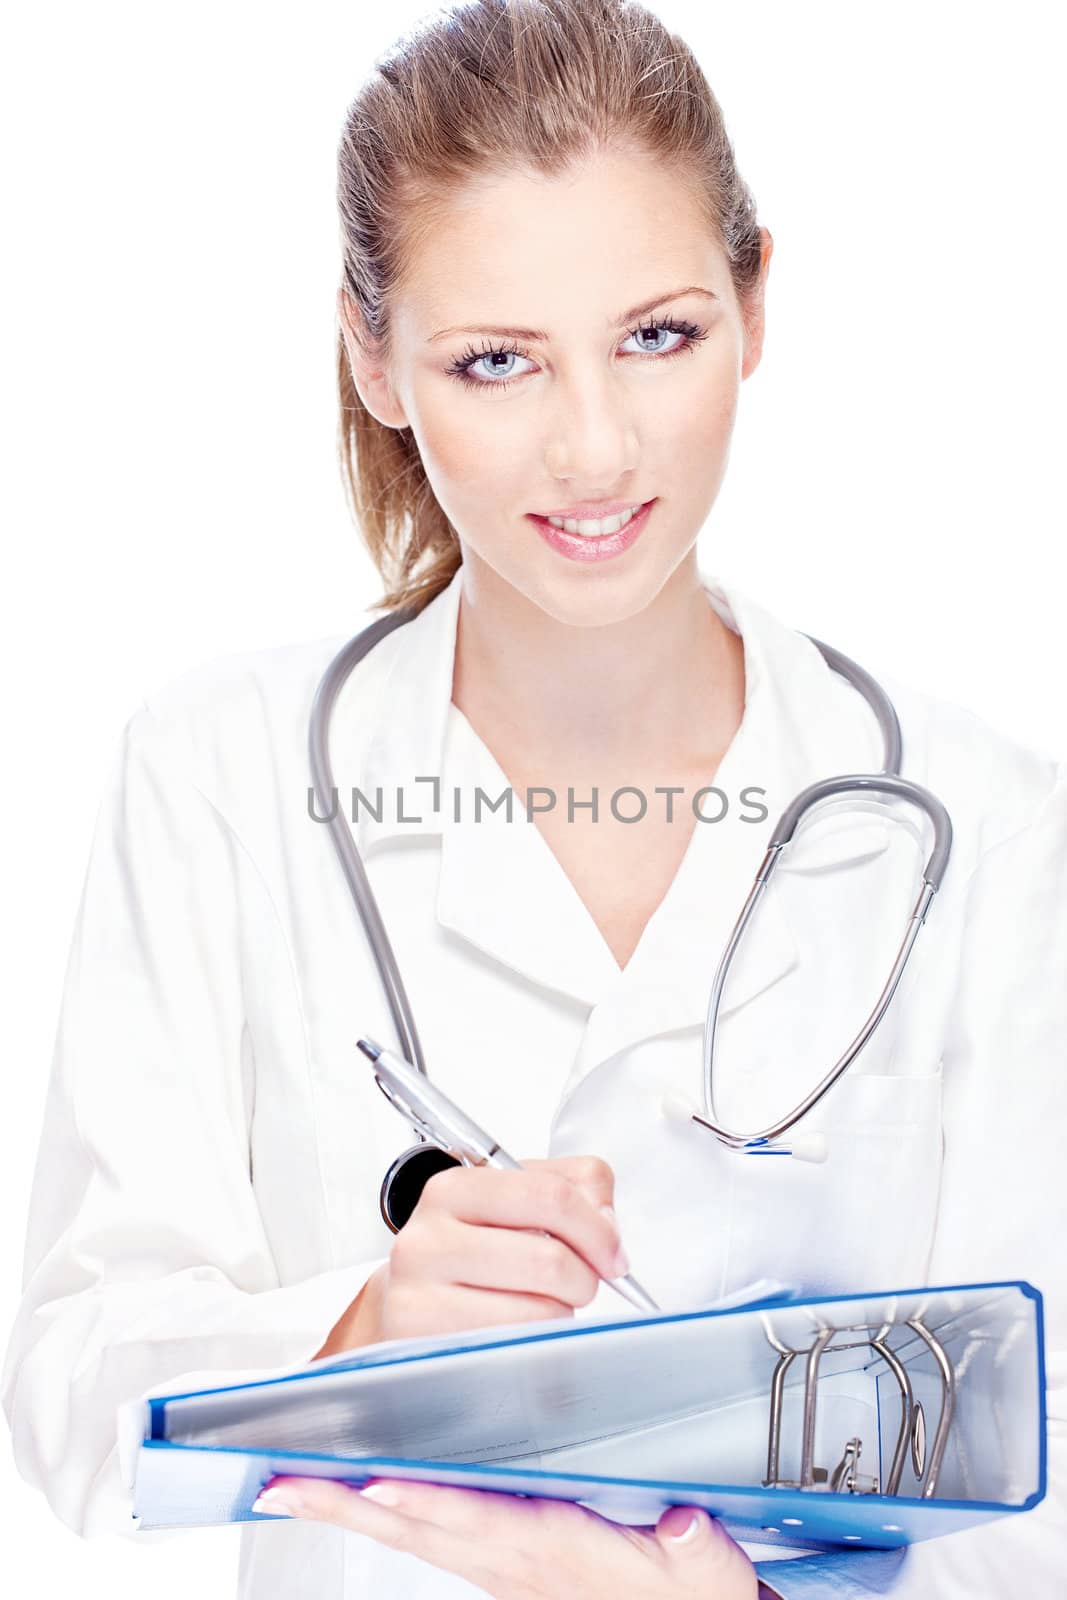 female doctor with papers and stethoscope by imarin